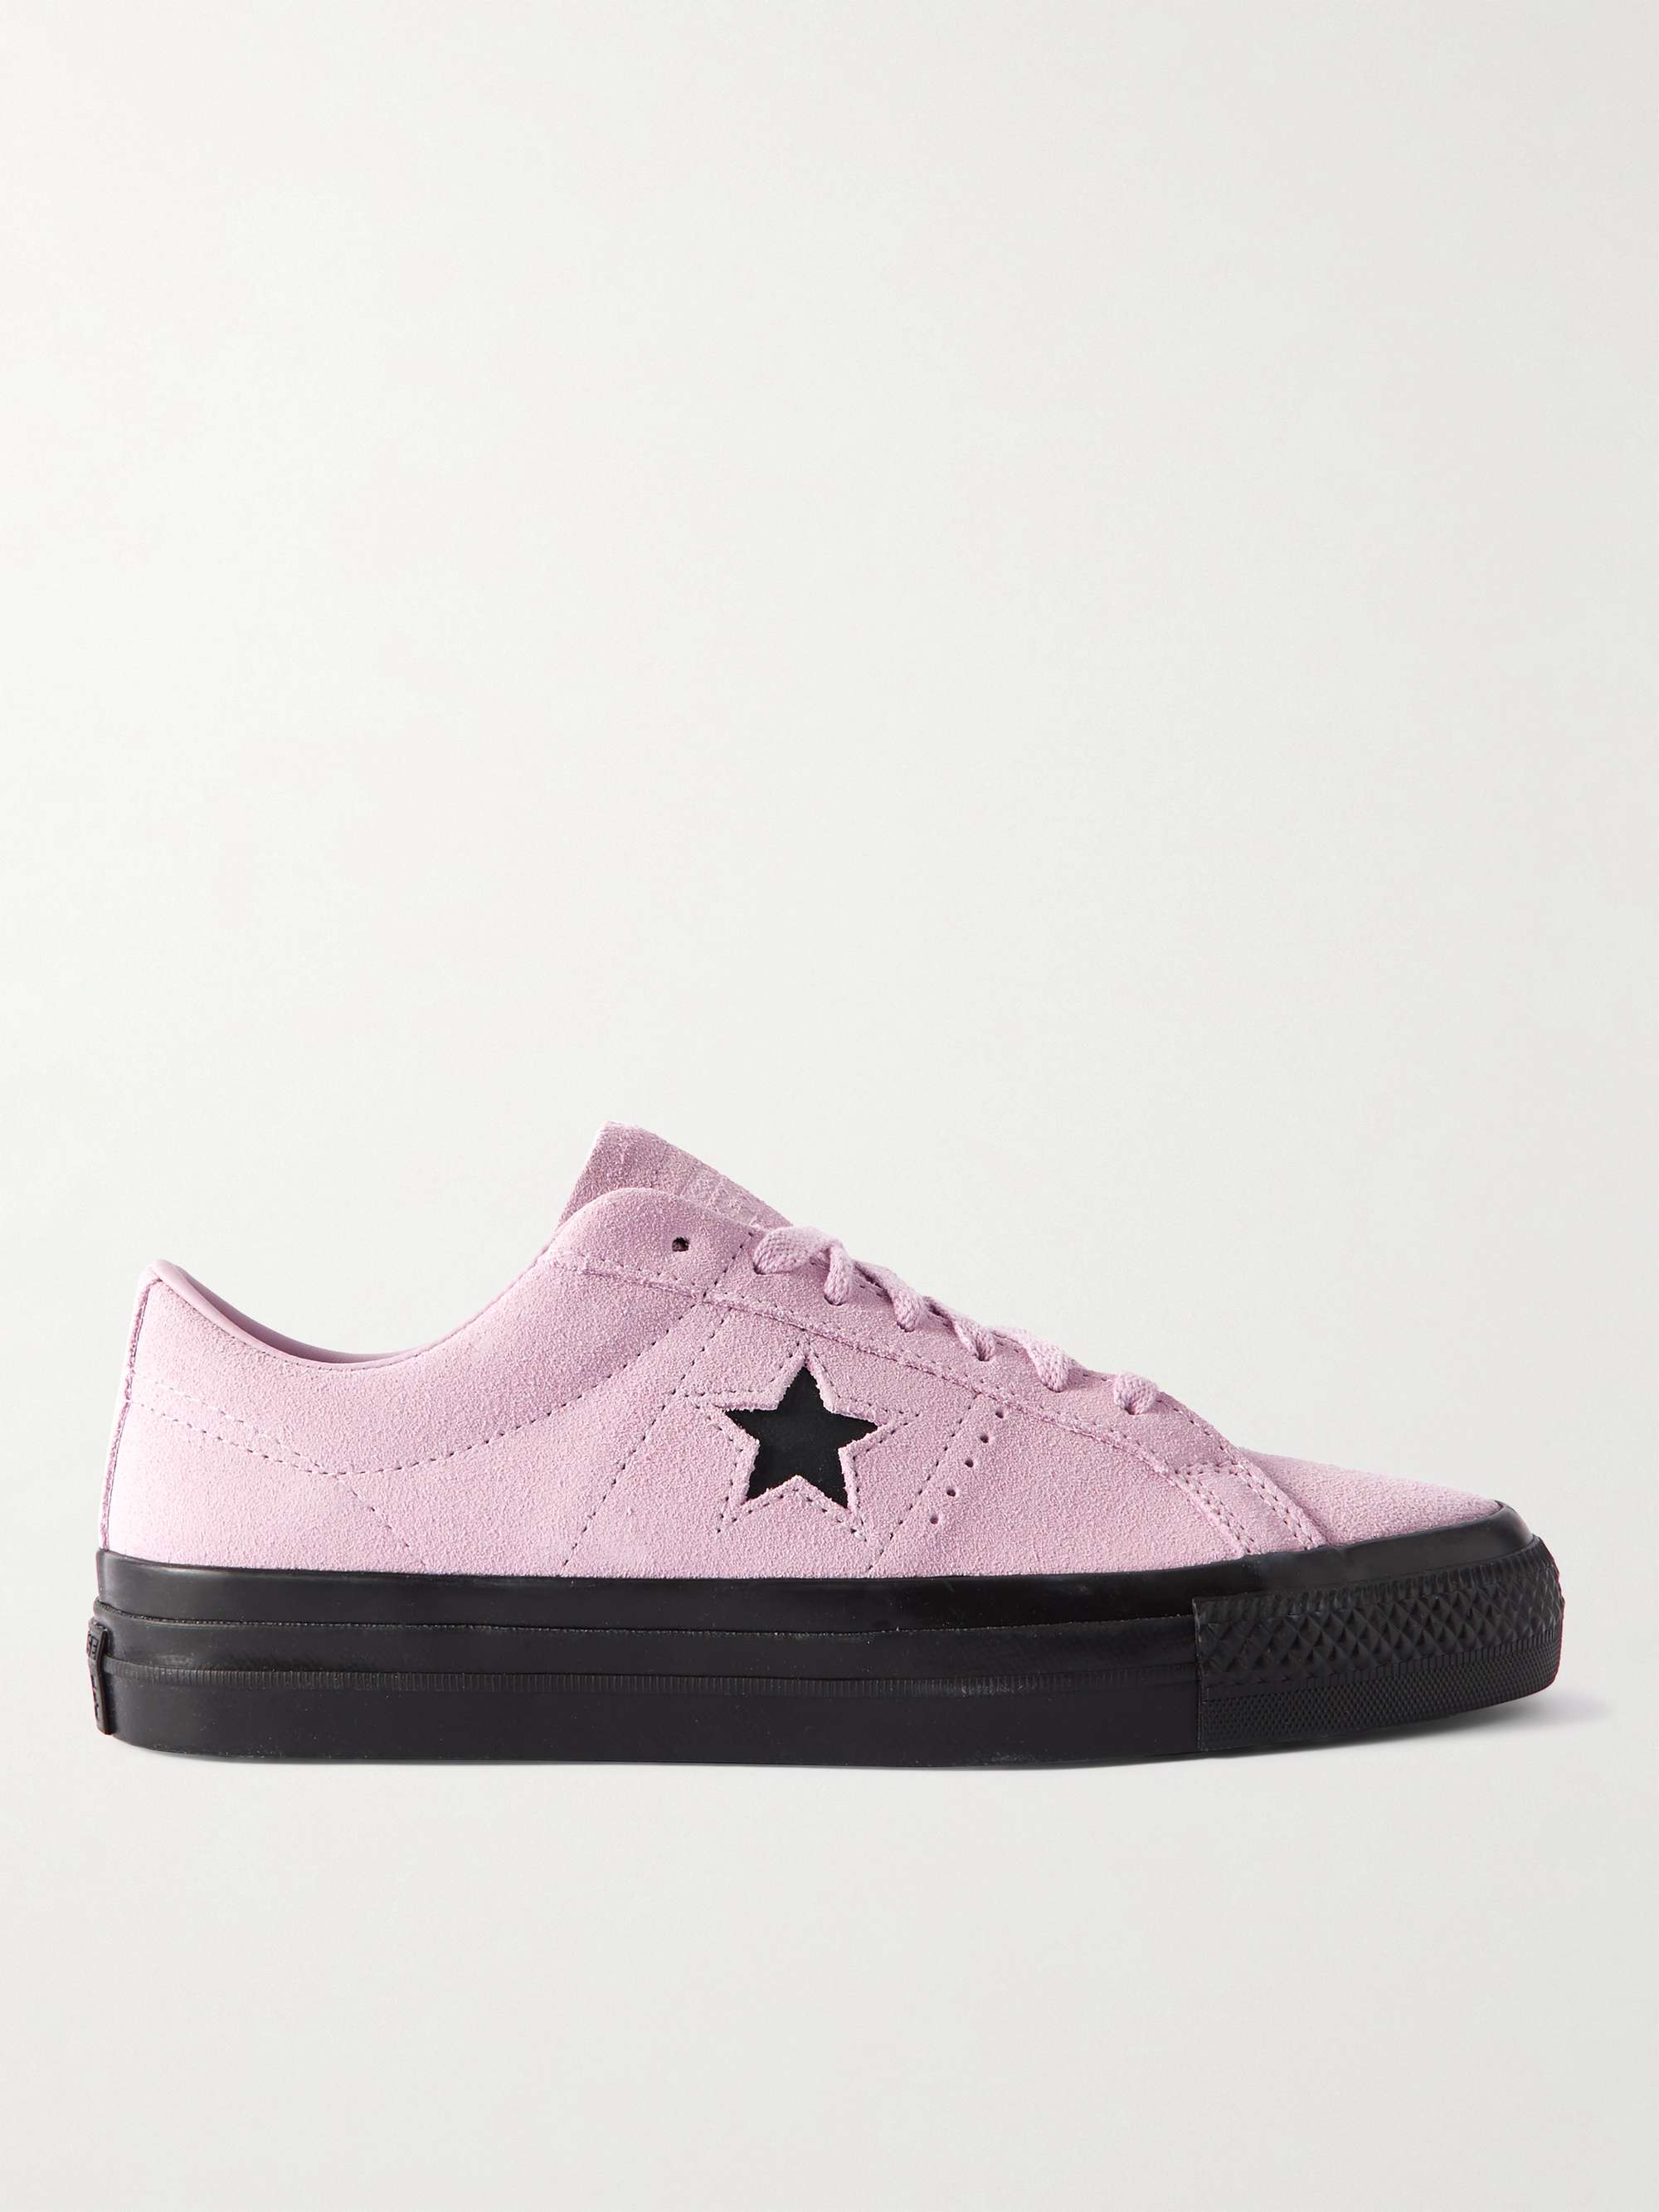 CONVERSE One Star Pro Leather-Trimmed Suede Sneakers for Men | MR PORTER